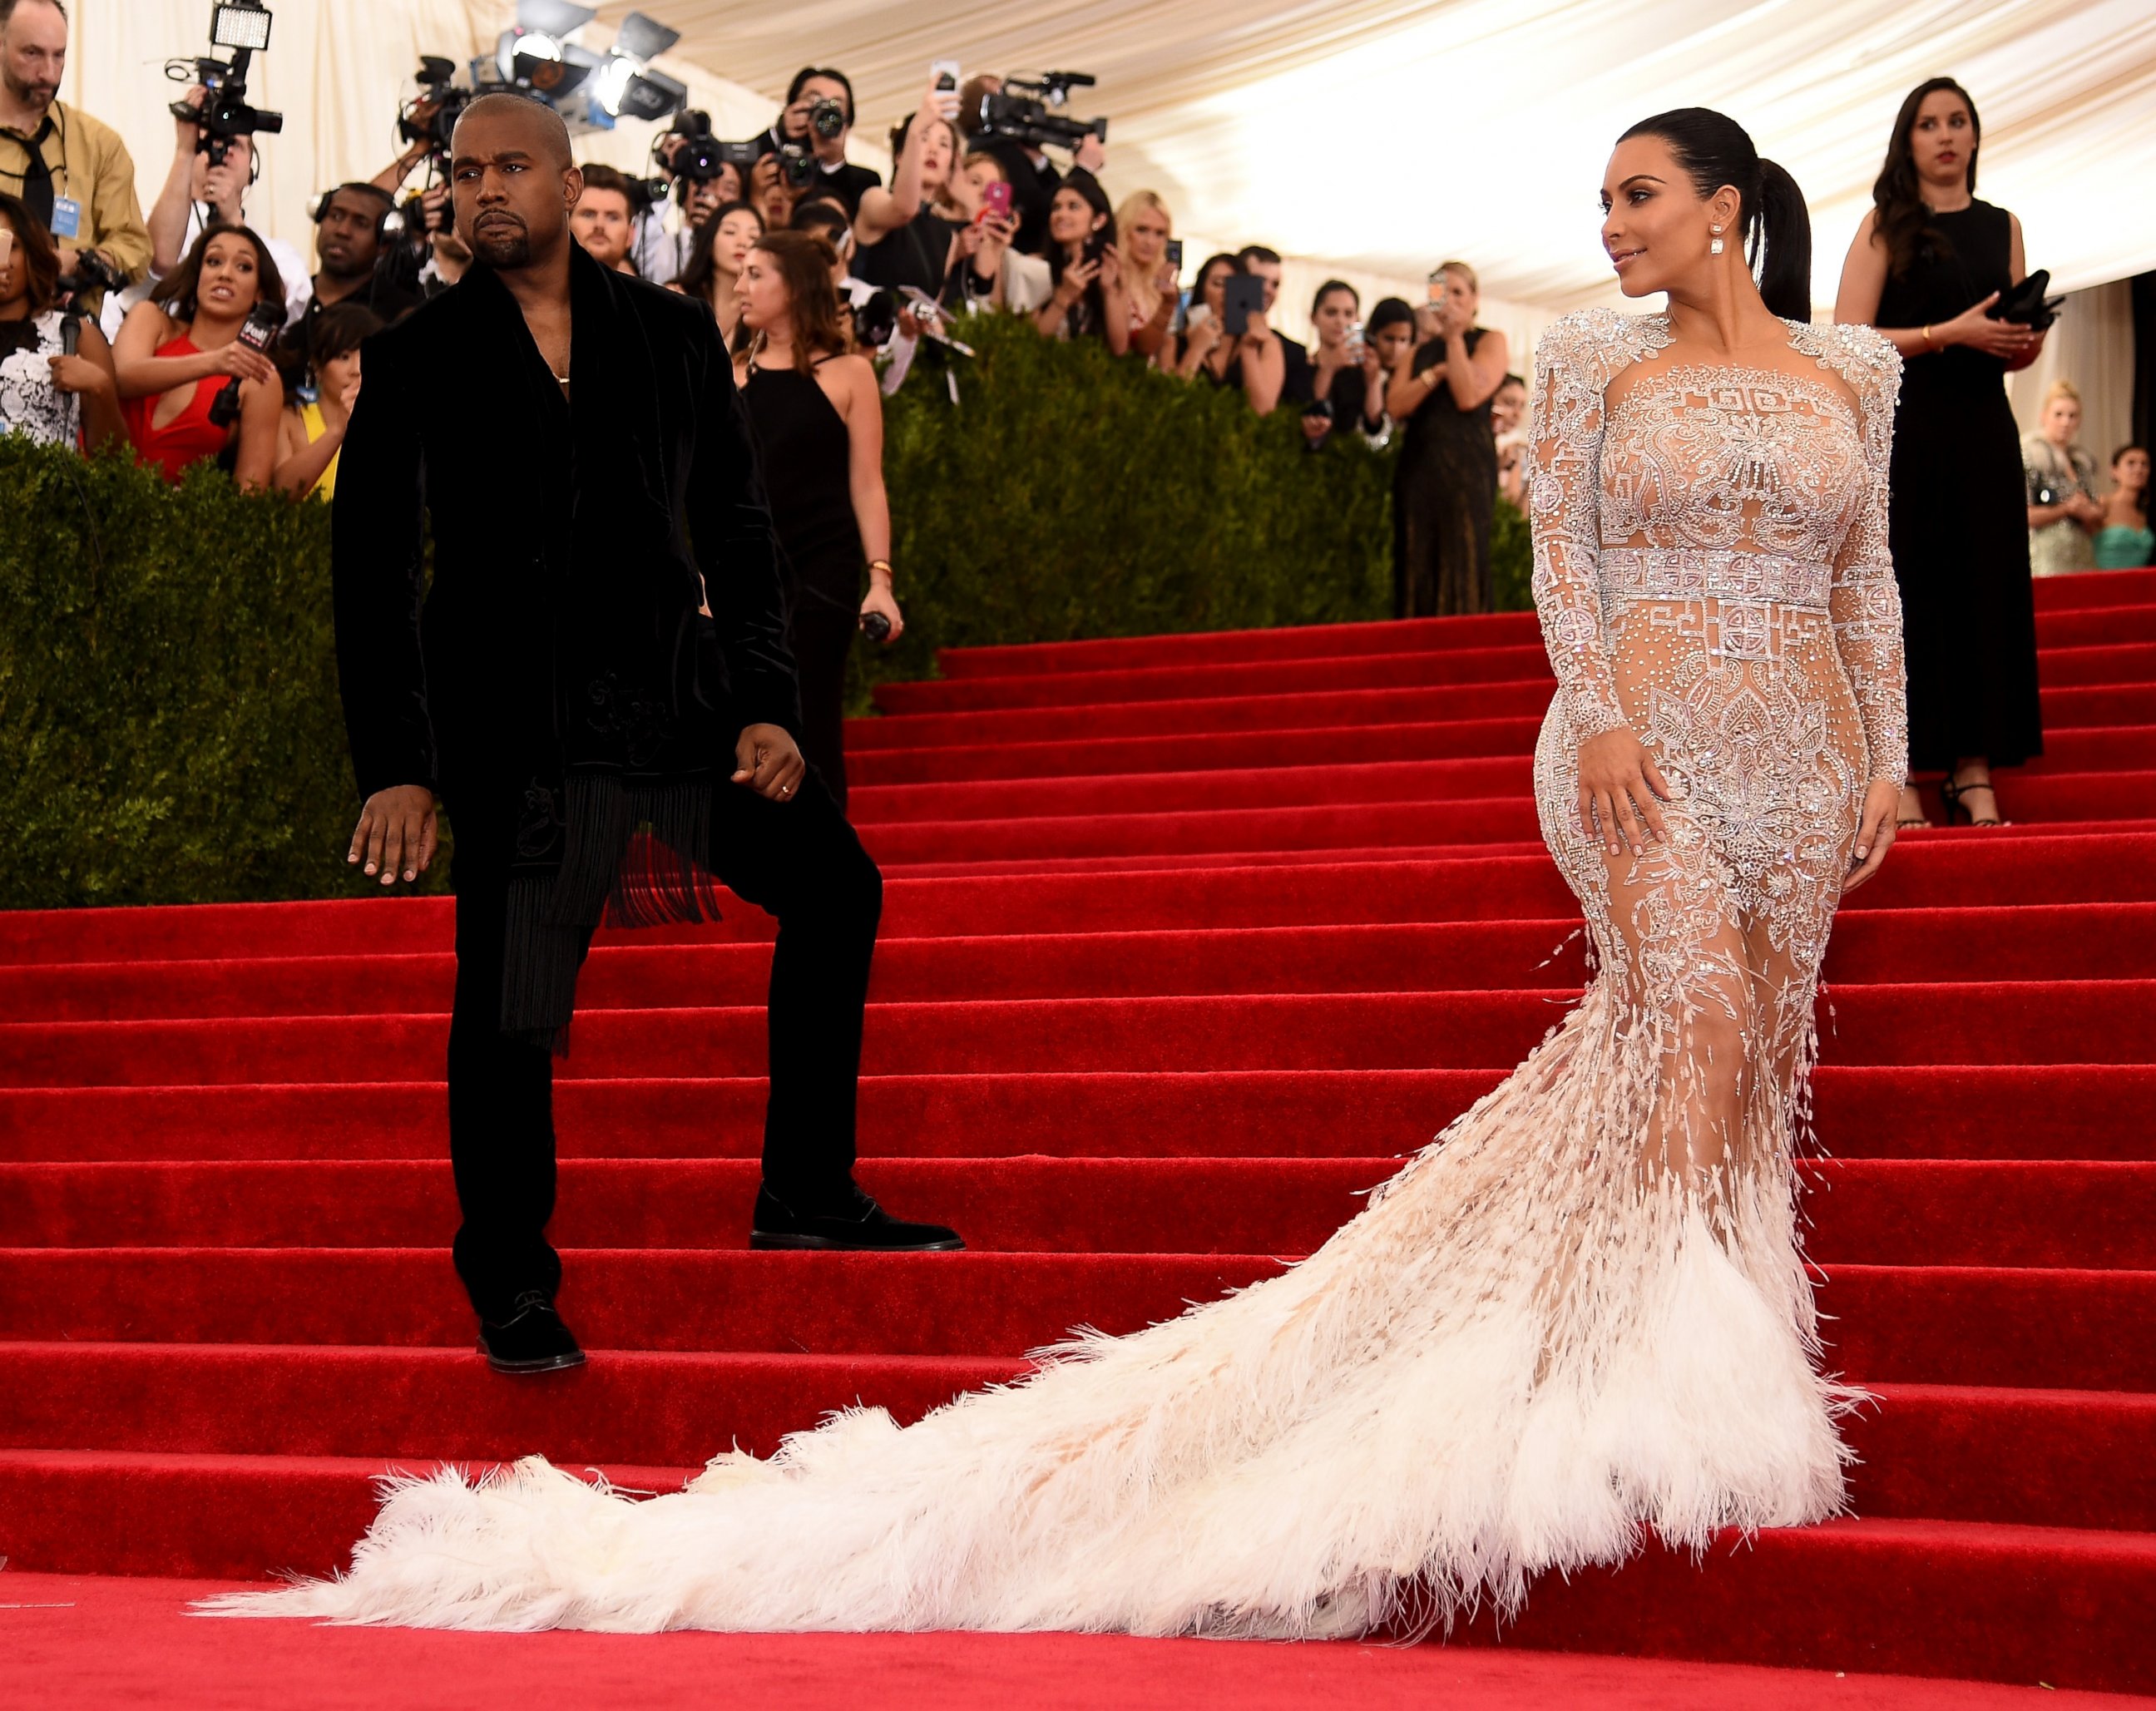 PHOTO: Kanye West and Kim Kardashian West attend the "China: Through The Looking Glass" Costume Institute Benefit Gala at the Metropolitan Museum of Art,  May 4, 2015 in New York.